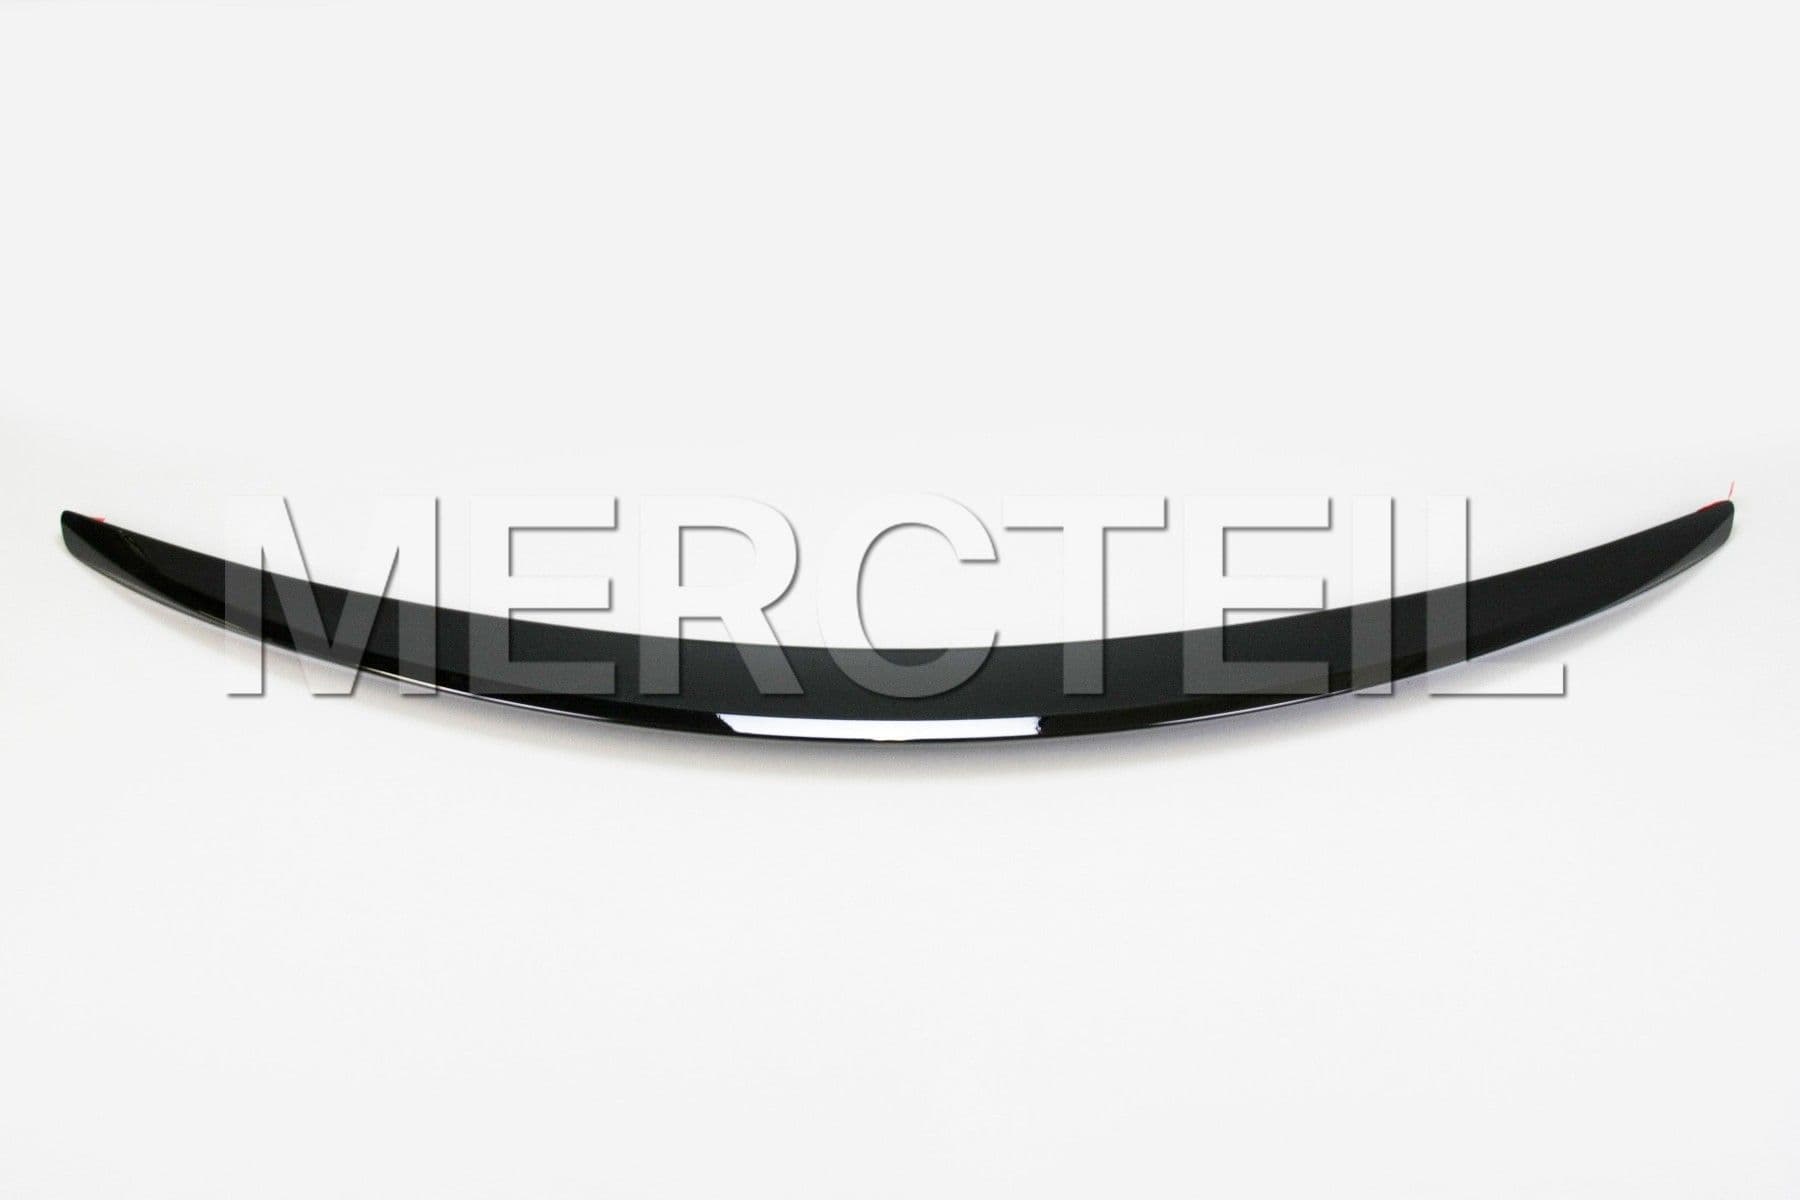 AMG Spoiler for GLE-Class Coupe (part number: 	
A29279000009775)